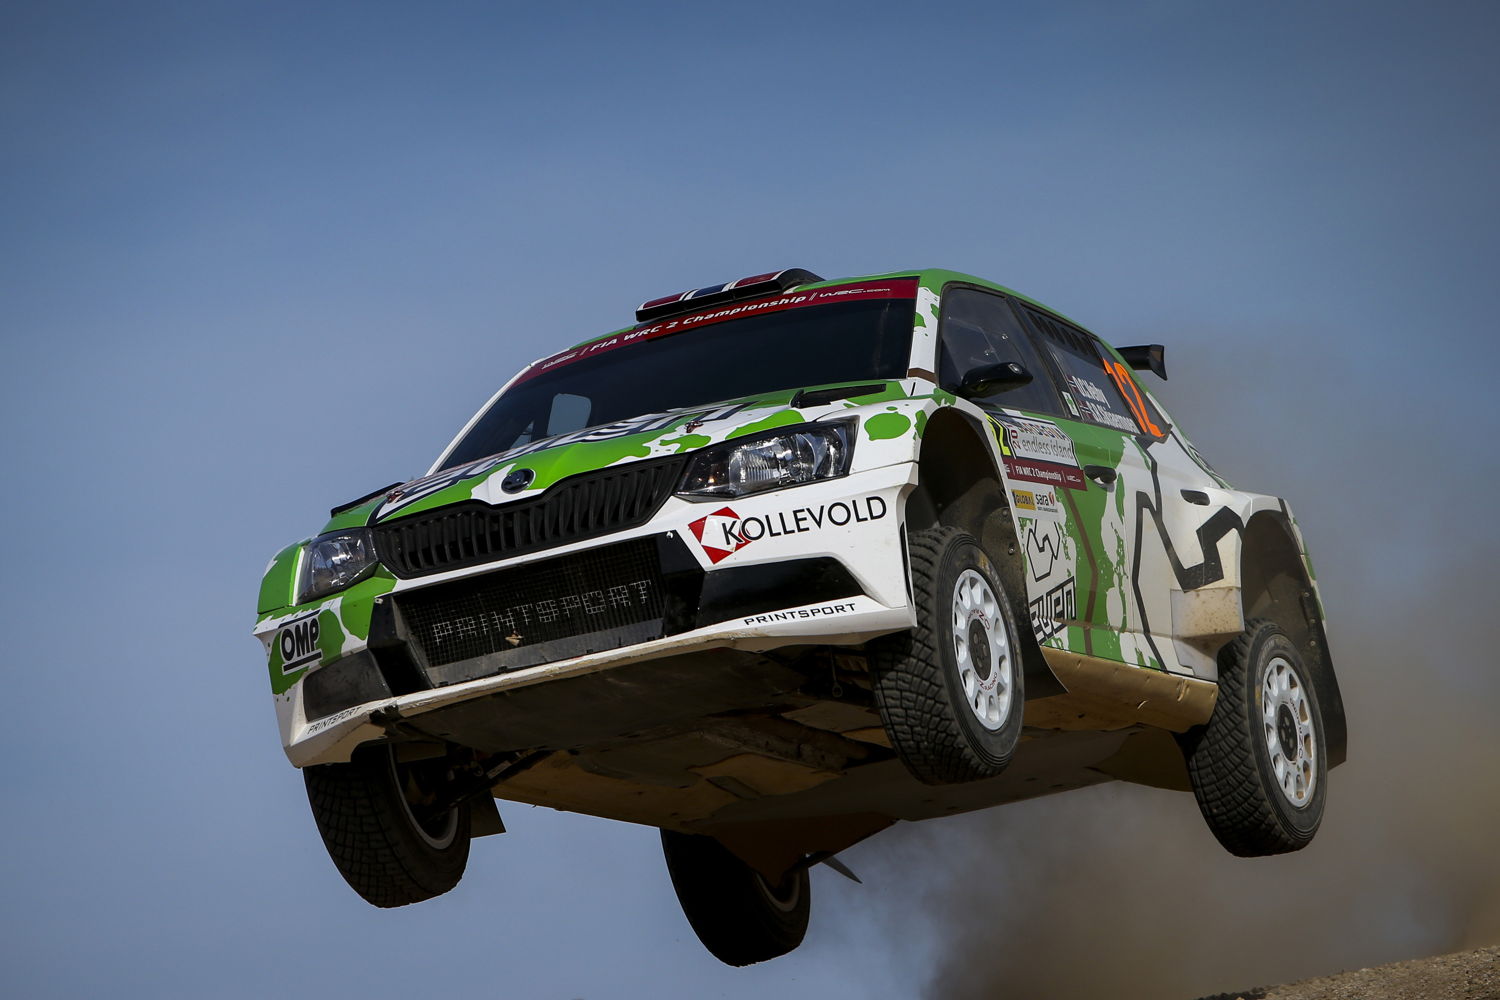 Among 14 privateer ŠKODA teams, Ole Christian Veiby / Stig Rune Skjaermoen (NOR/NOR) are top favourites for victory in the WRC 2 category.